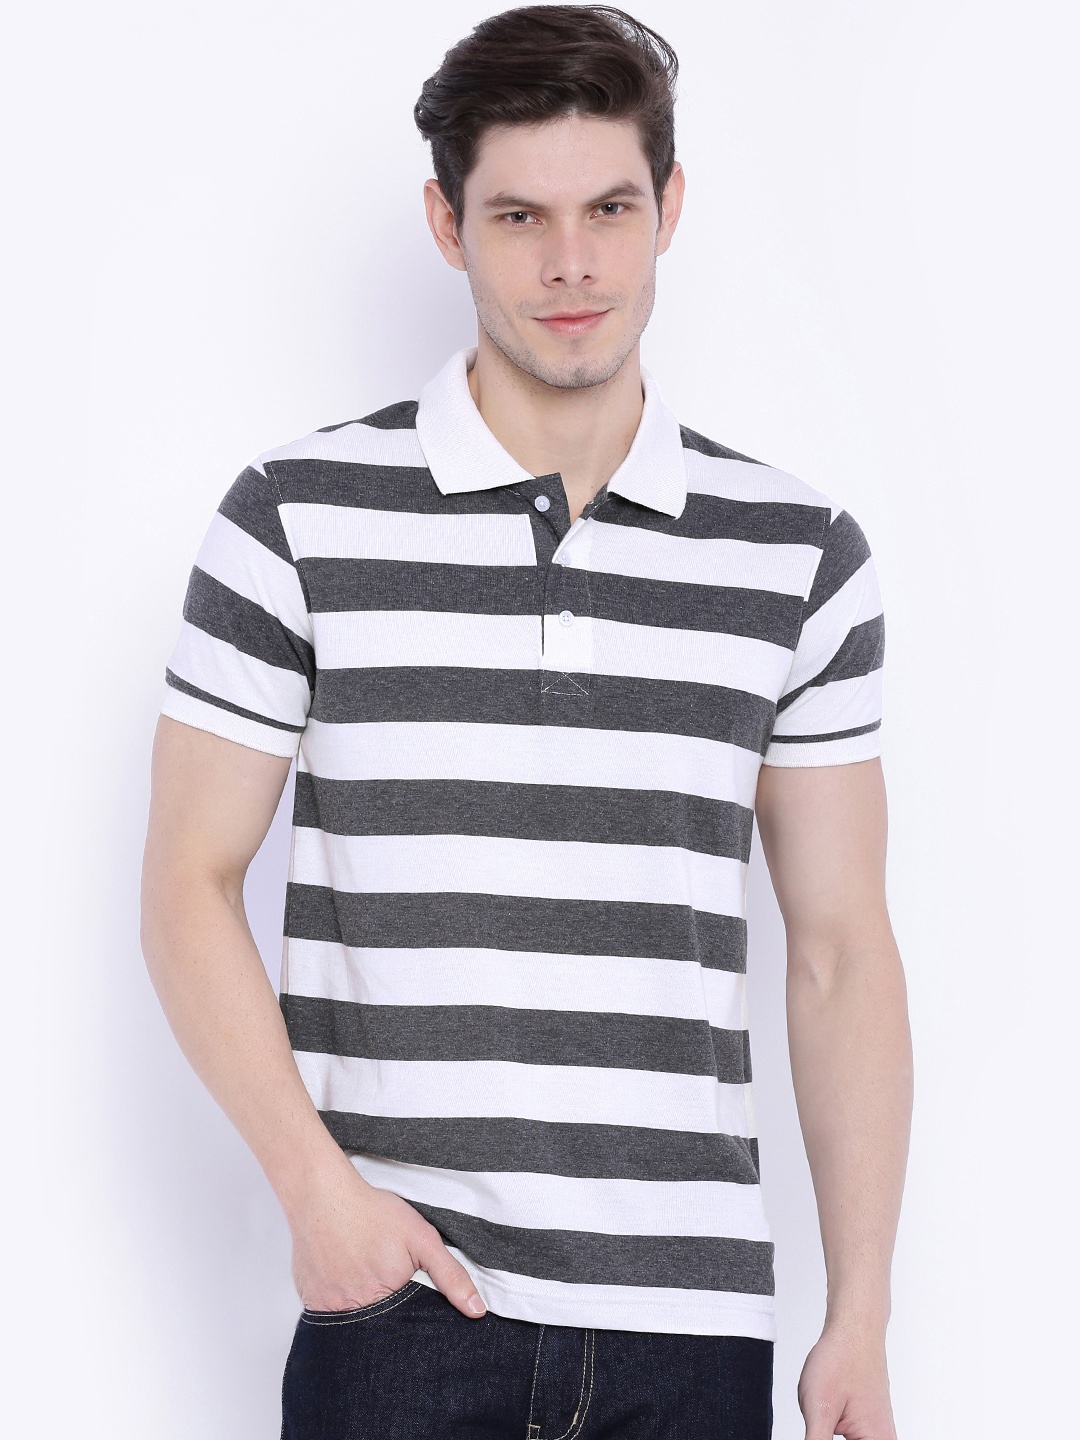 

American Crew Charcoal Grey & Off-White Striped Polo T-shirt